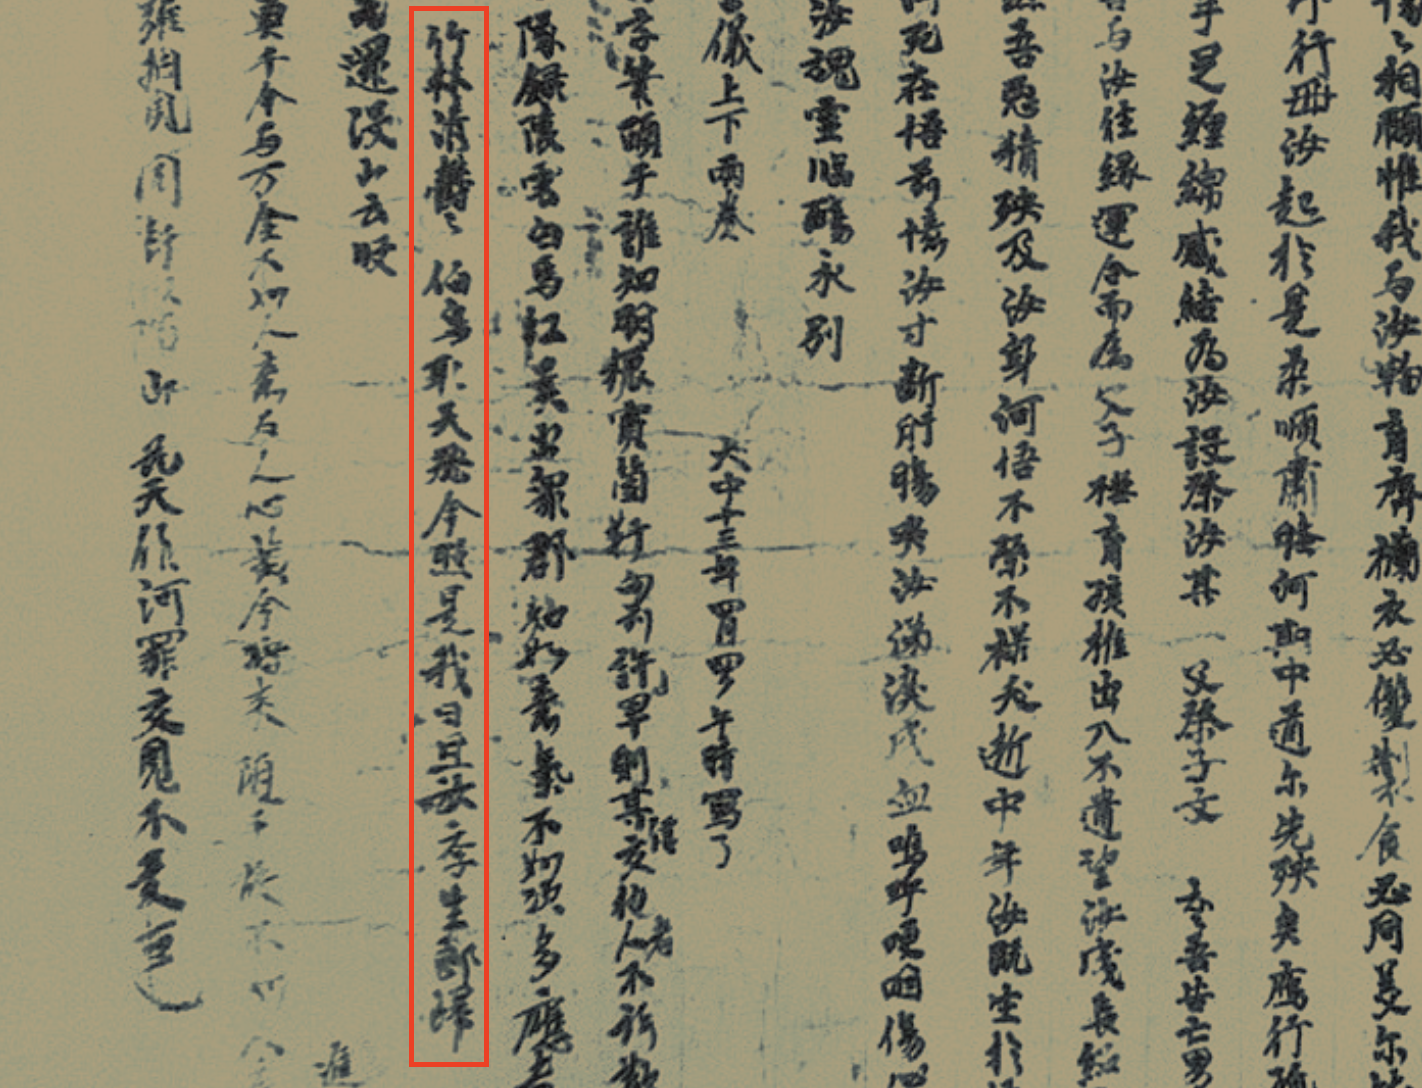 a student poem in Dunhuang manuscript P.2622